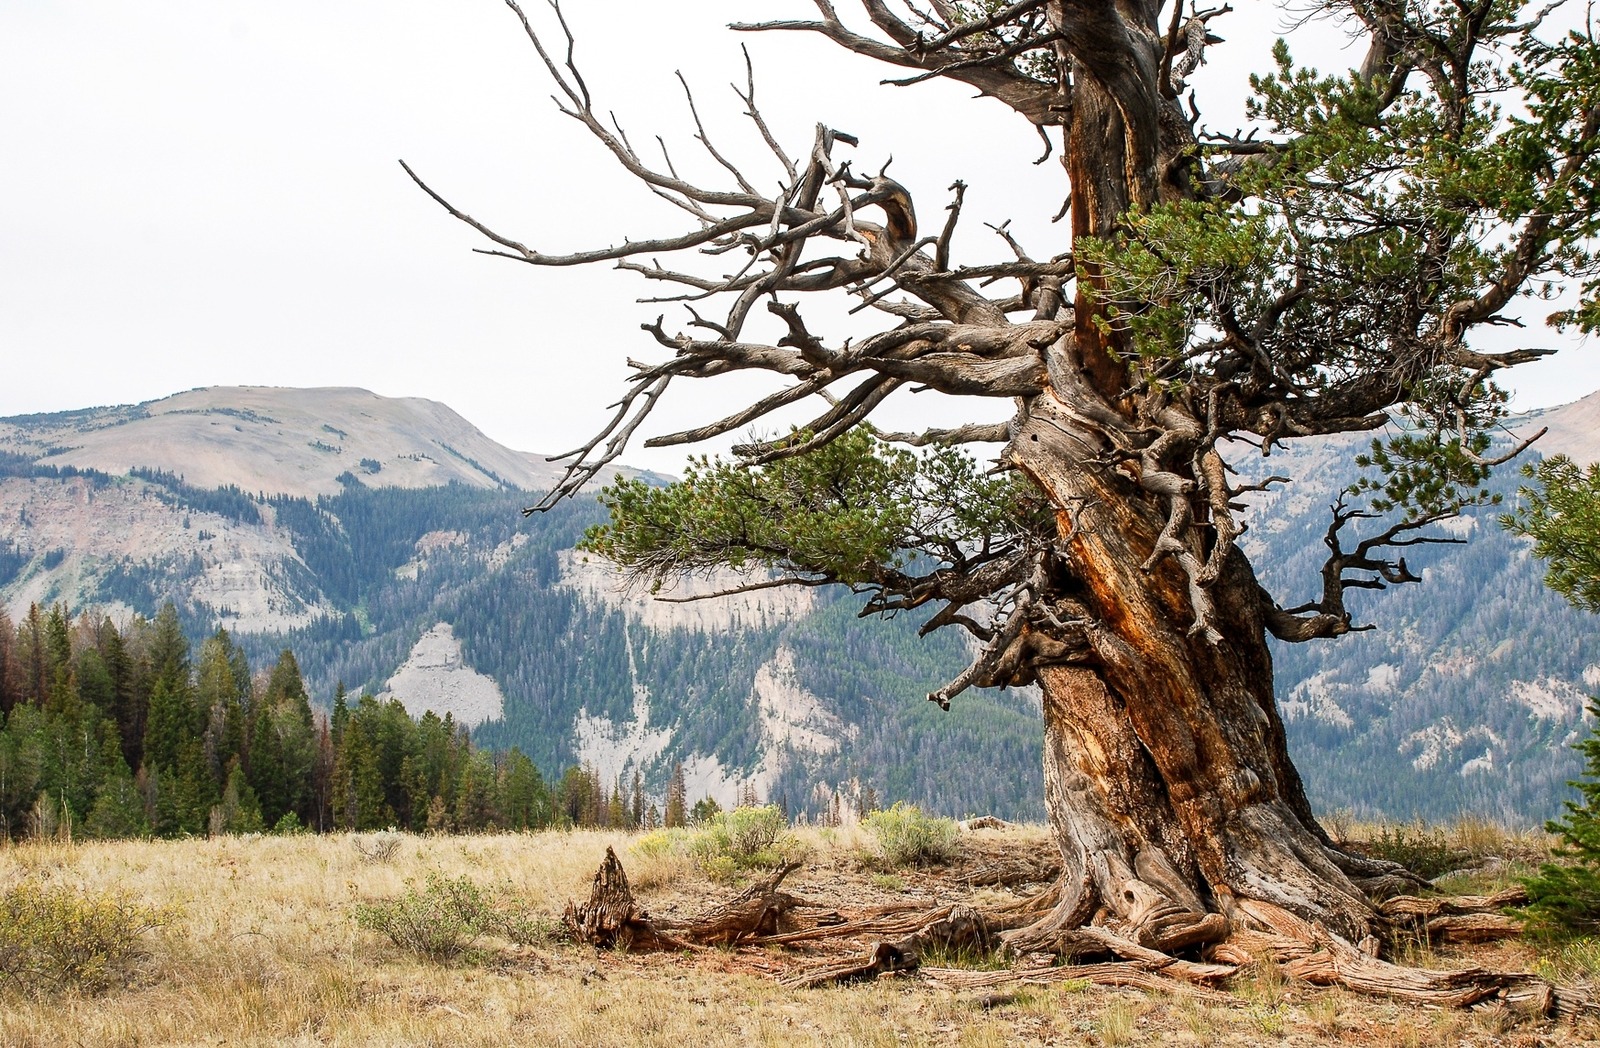 Old-growth forests, like this ancient limber pine in Wyoming's Gros Ventre Wilderness, have long found refuge in Greater Yellowstone. Photo by Susan Marsh